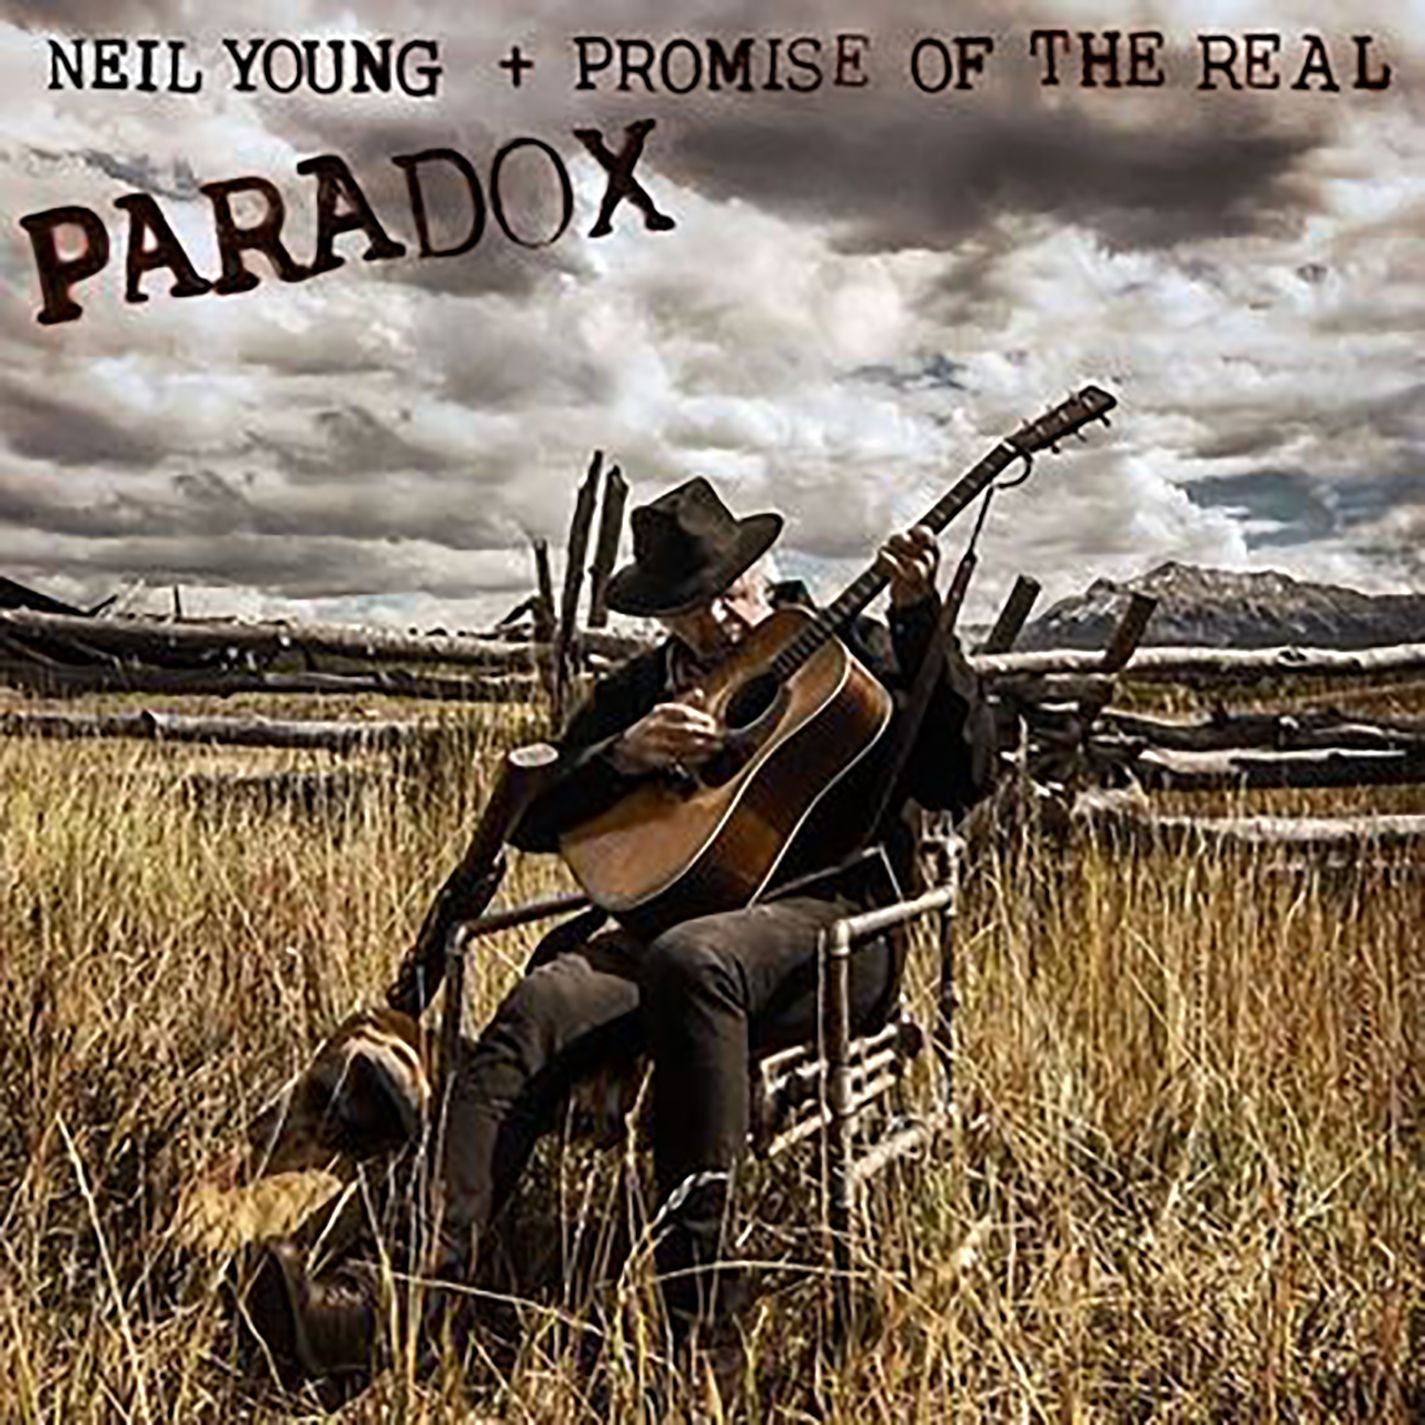 Neil Young + Promise of the Real - Paradox